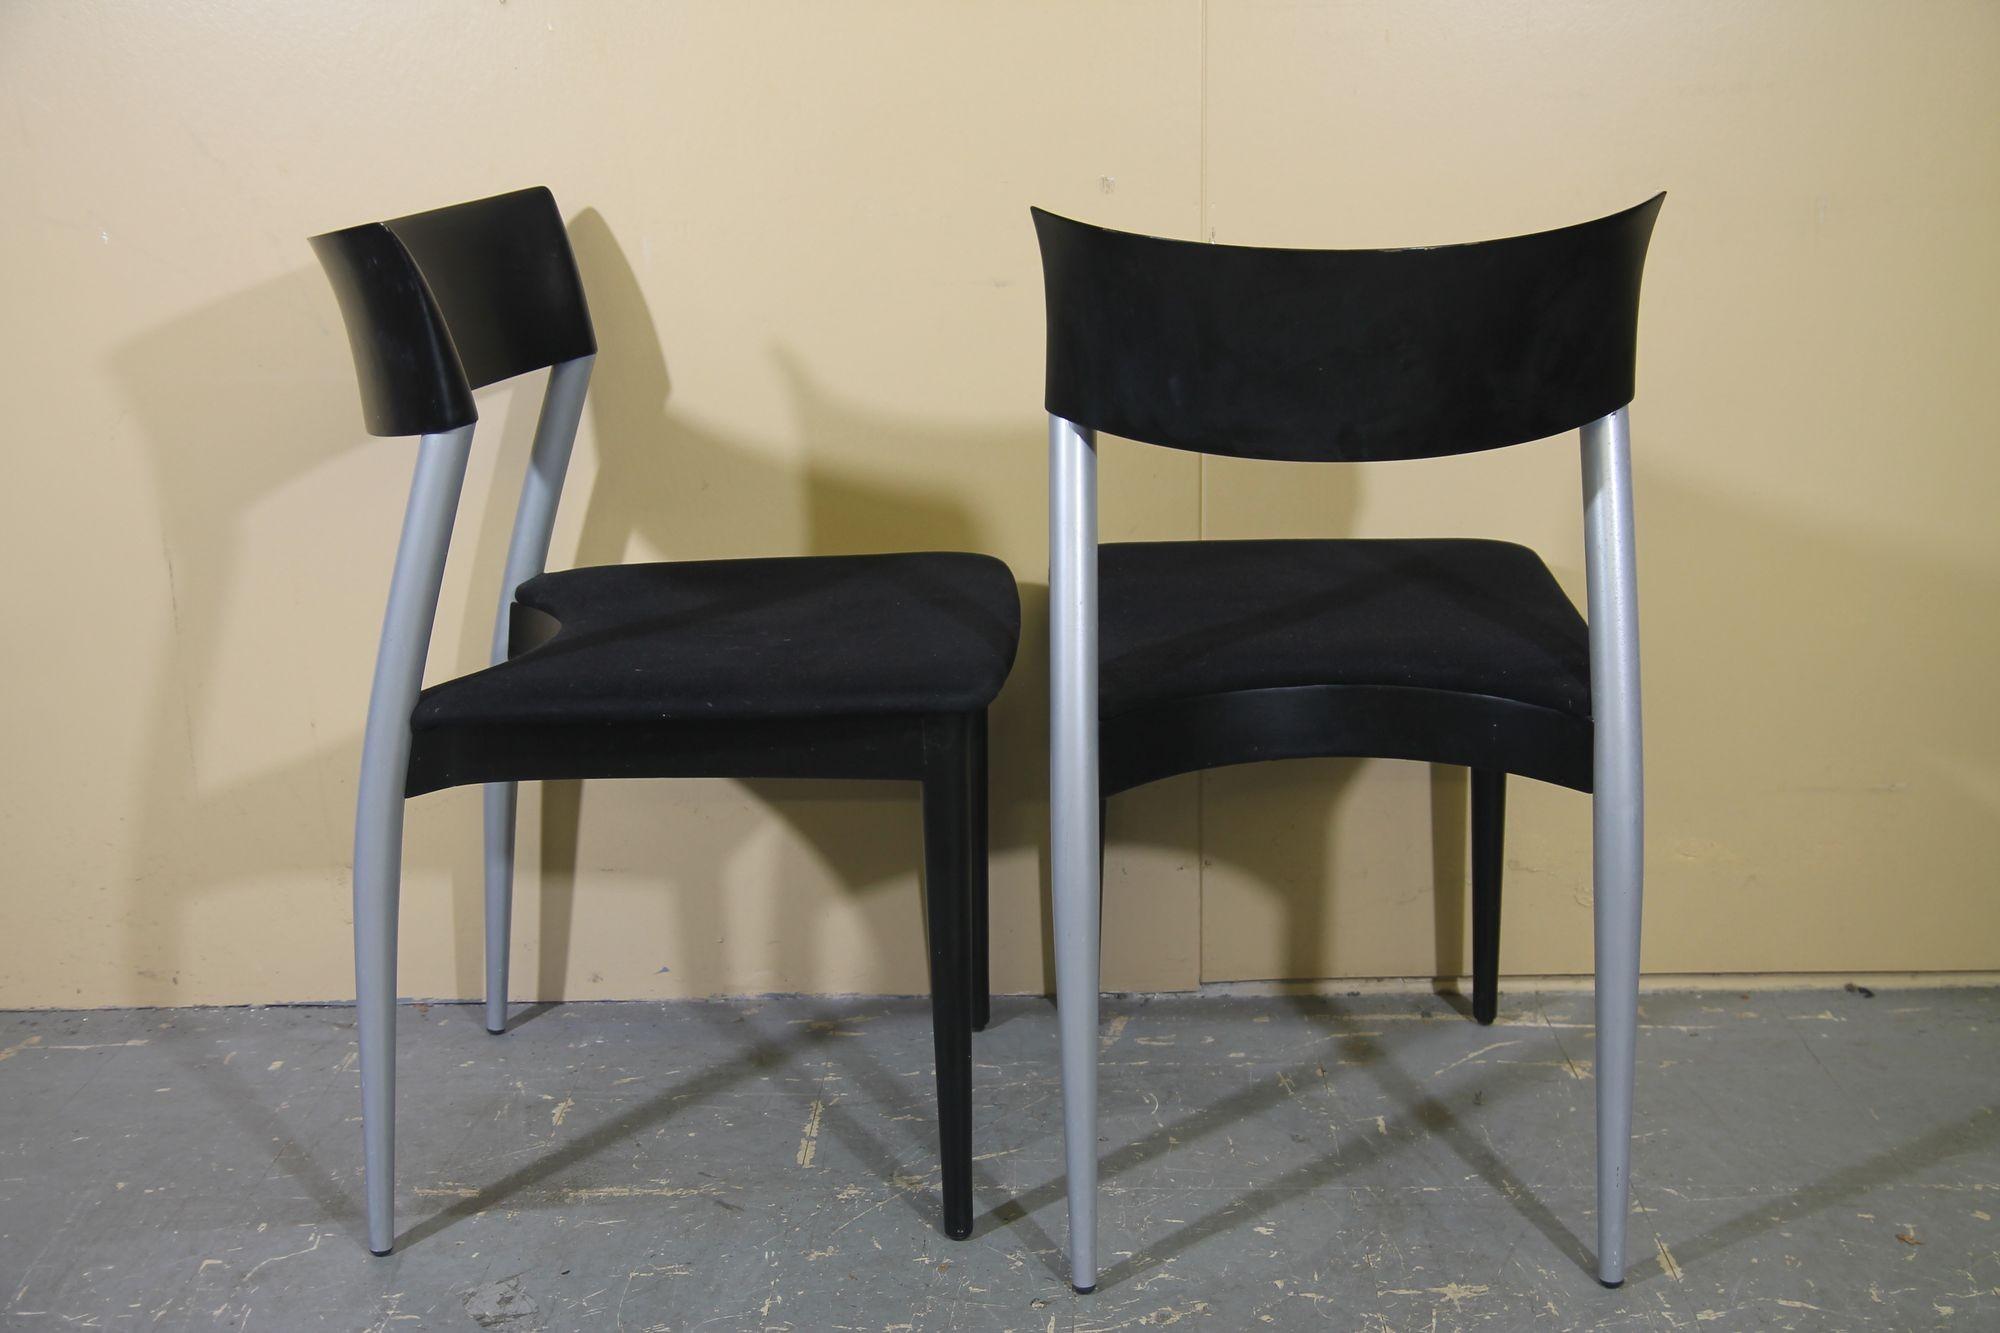 Italian chairs by Potocco In Good Condition For Sale In Asbury Park, NJ